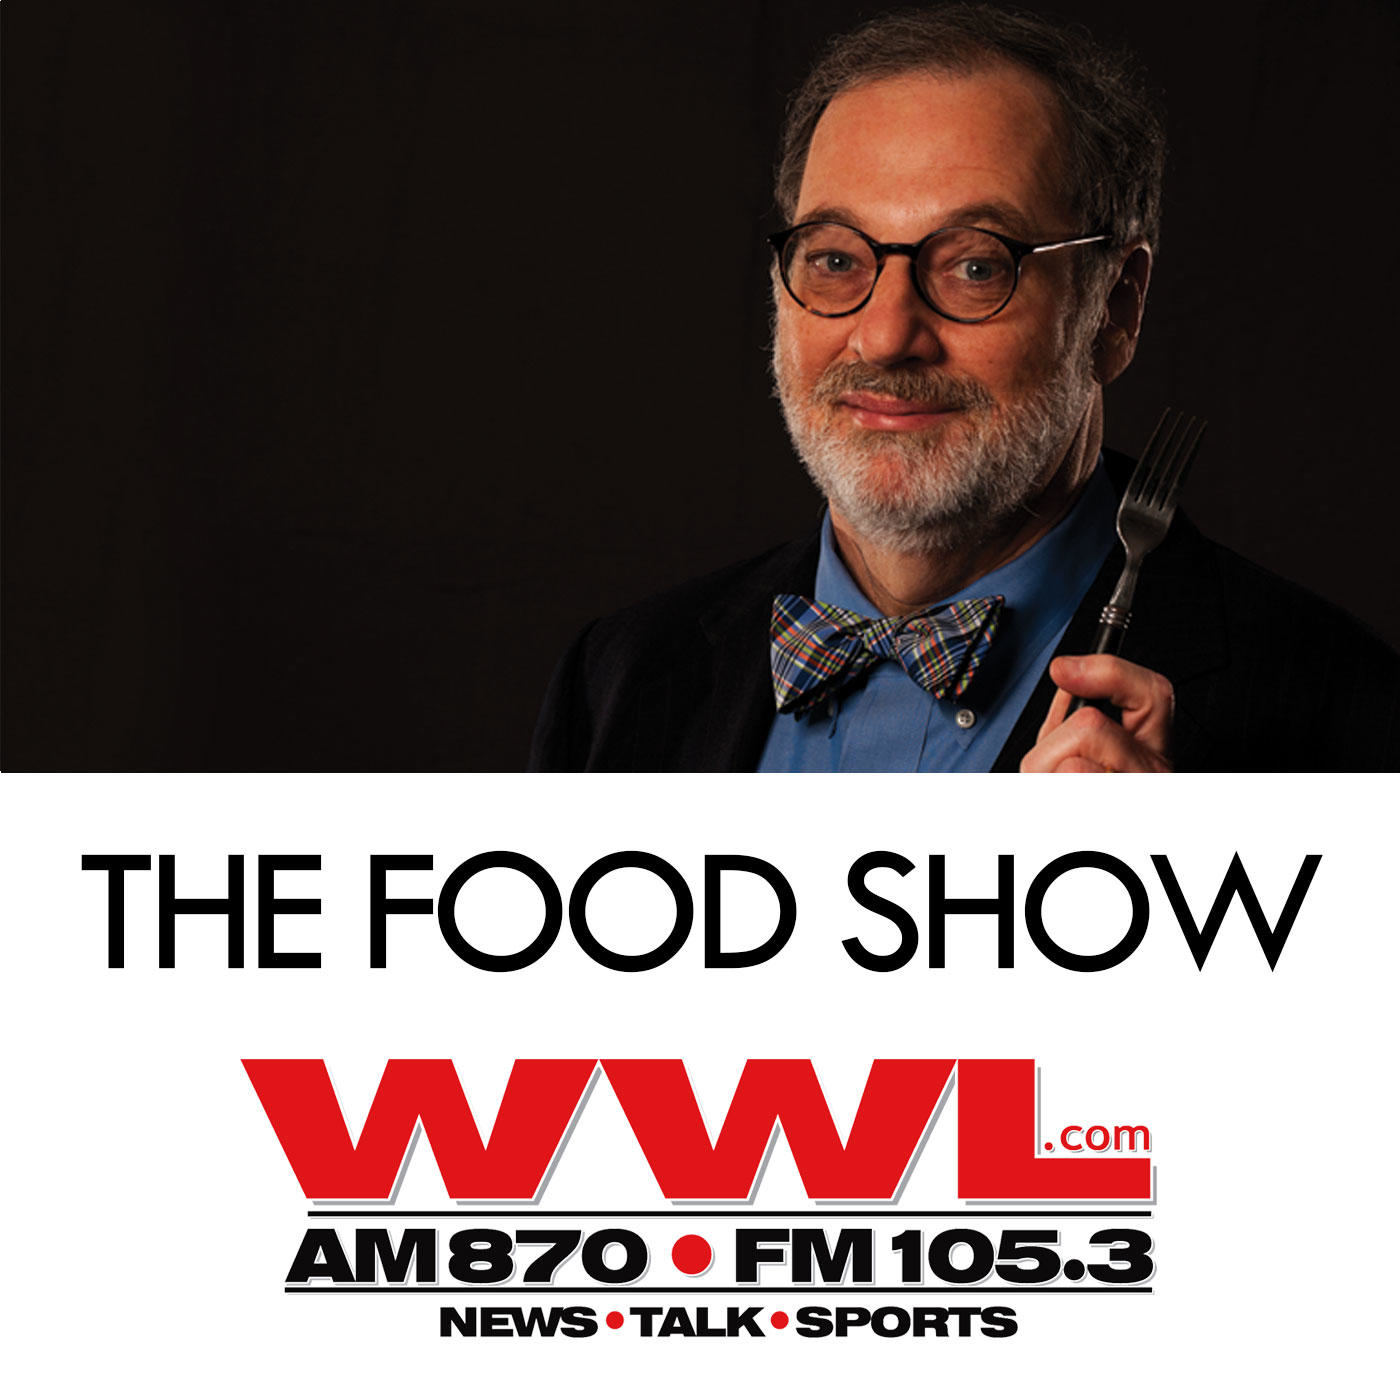 The Food Show 3pm 10-17-18